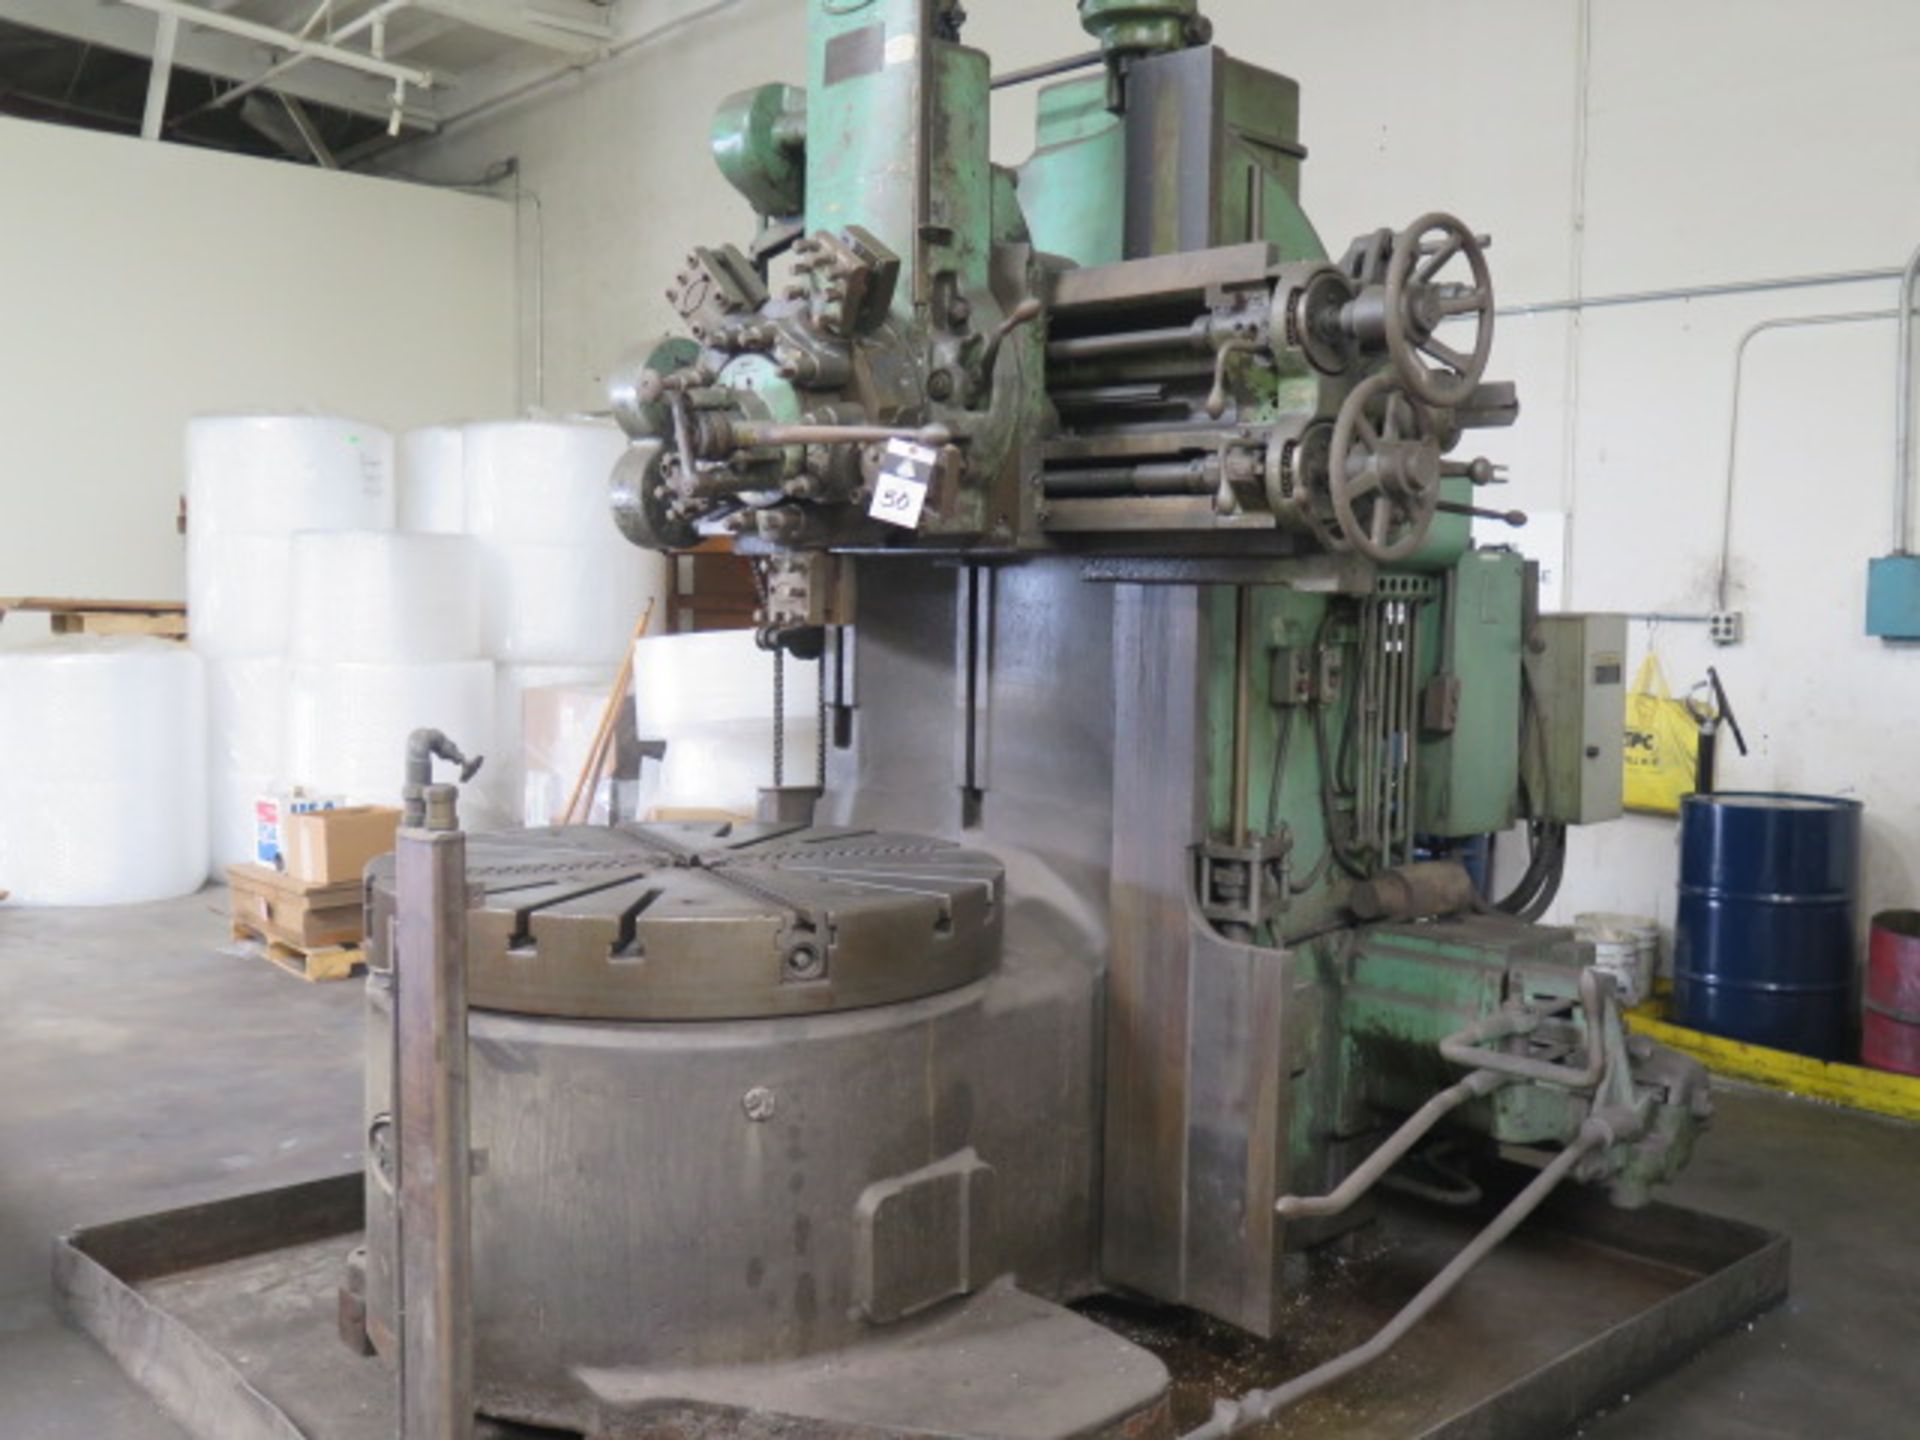 Bullard 50” Vertical Turret Lathe s/n 23496 w/ 5-Station Turret, 57” Max Swing, SOLD AS IS - Image 3 of 13